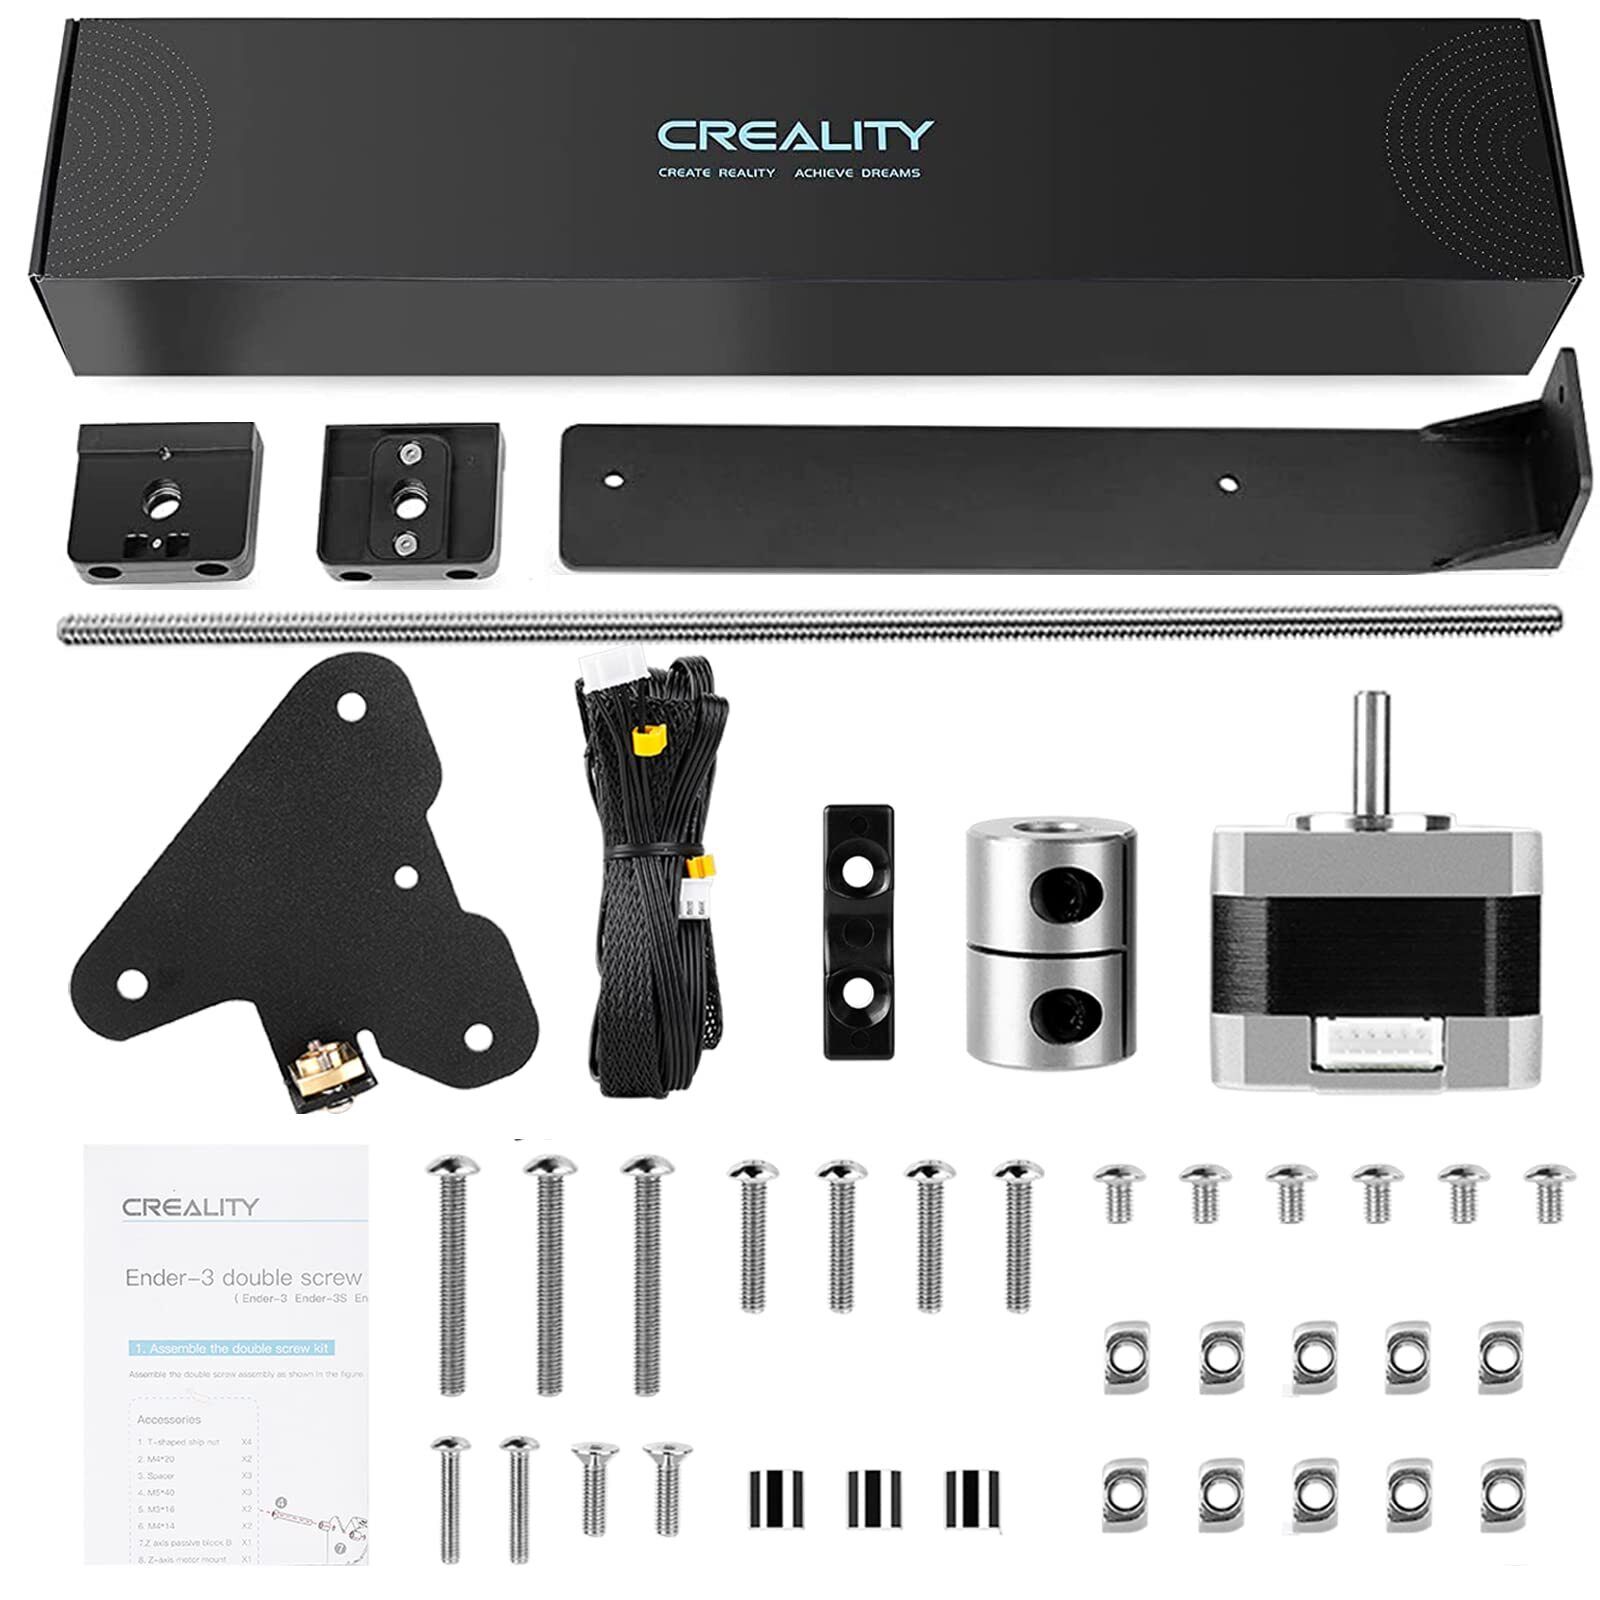 Official Creality Ender 3 Dual Z-axis Upgrade Kit with Lead Screw, Stepper Mo...